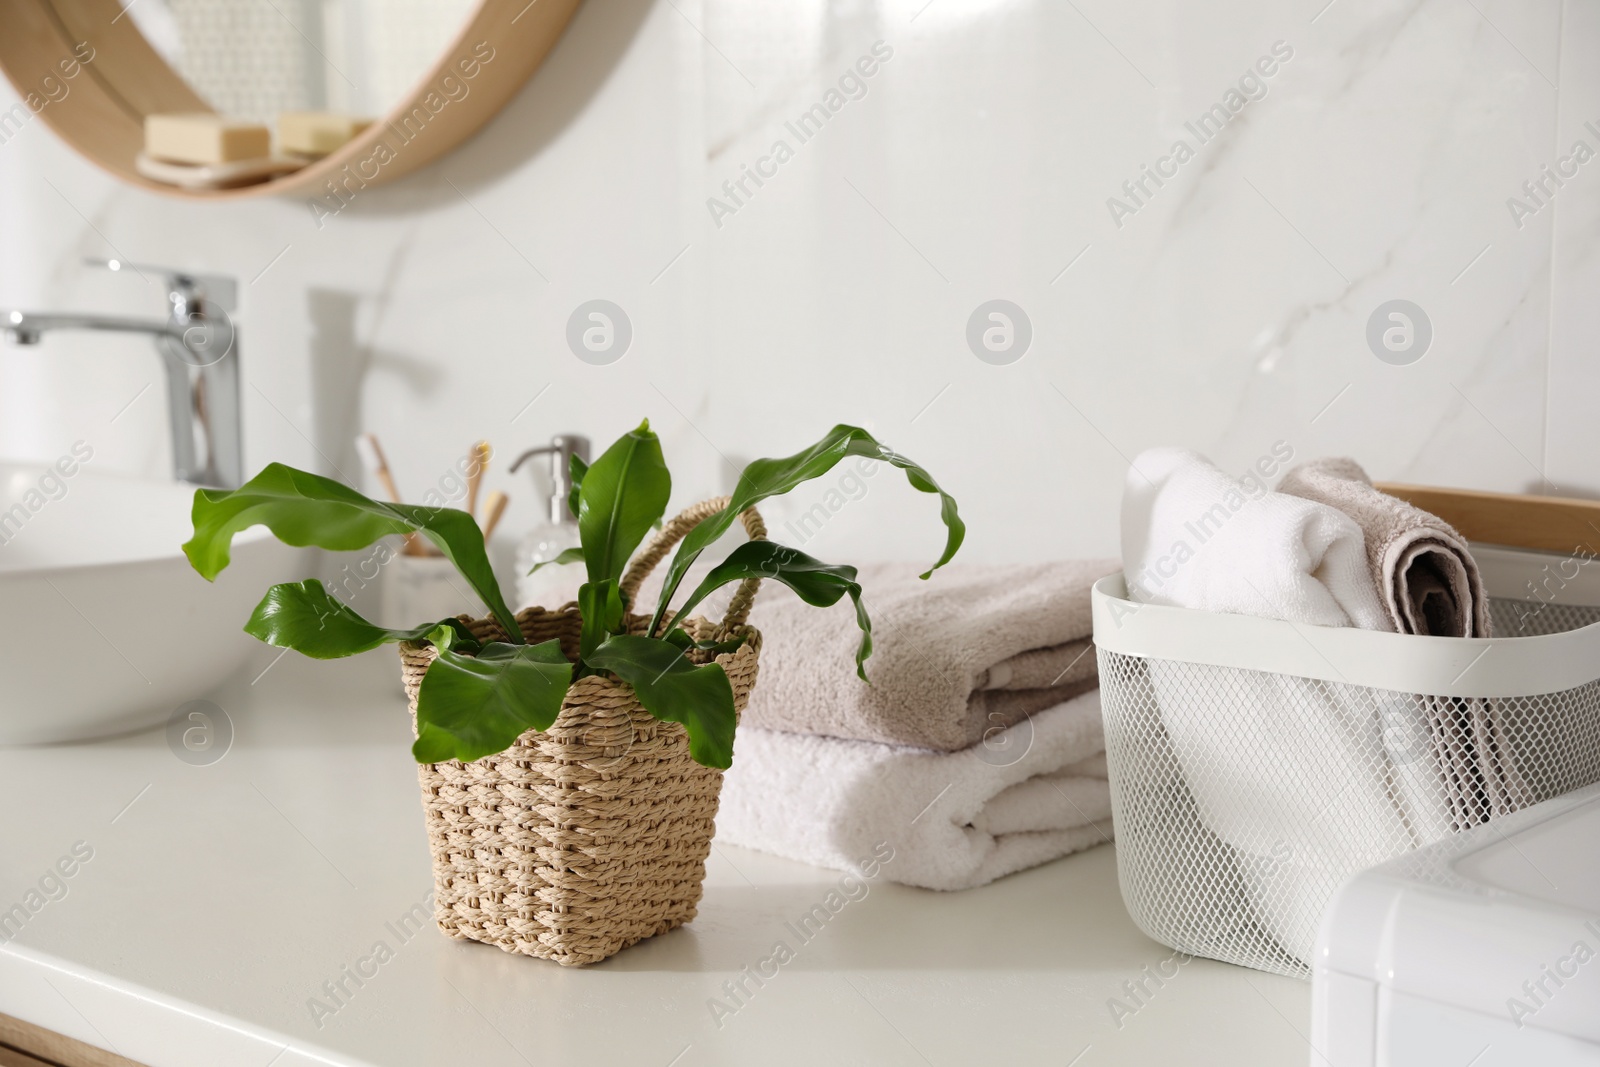 Photo of Beautiful green fern and towels on countertop in bathroom